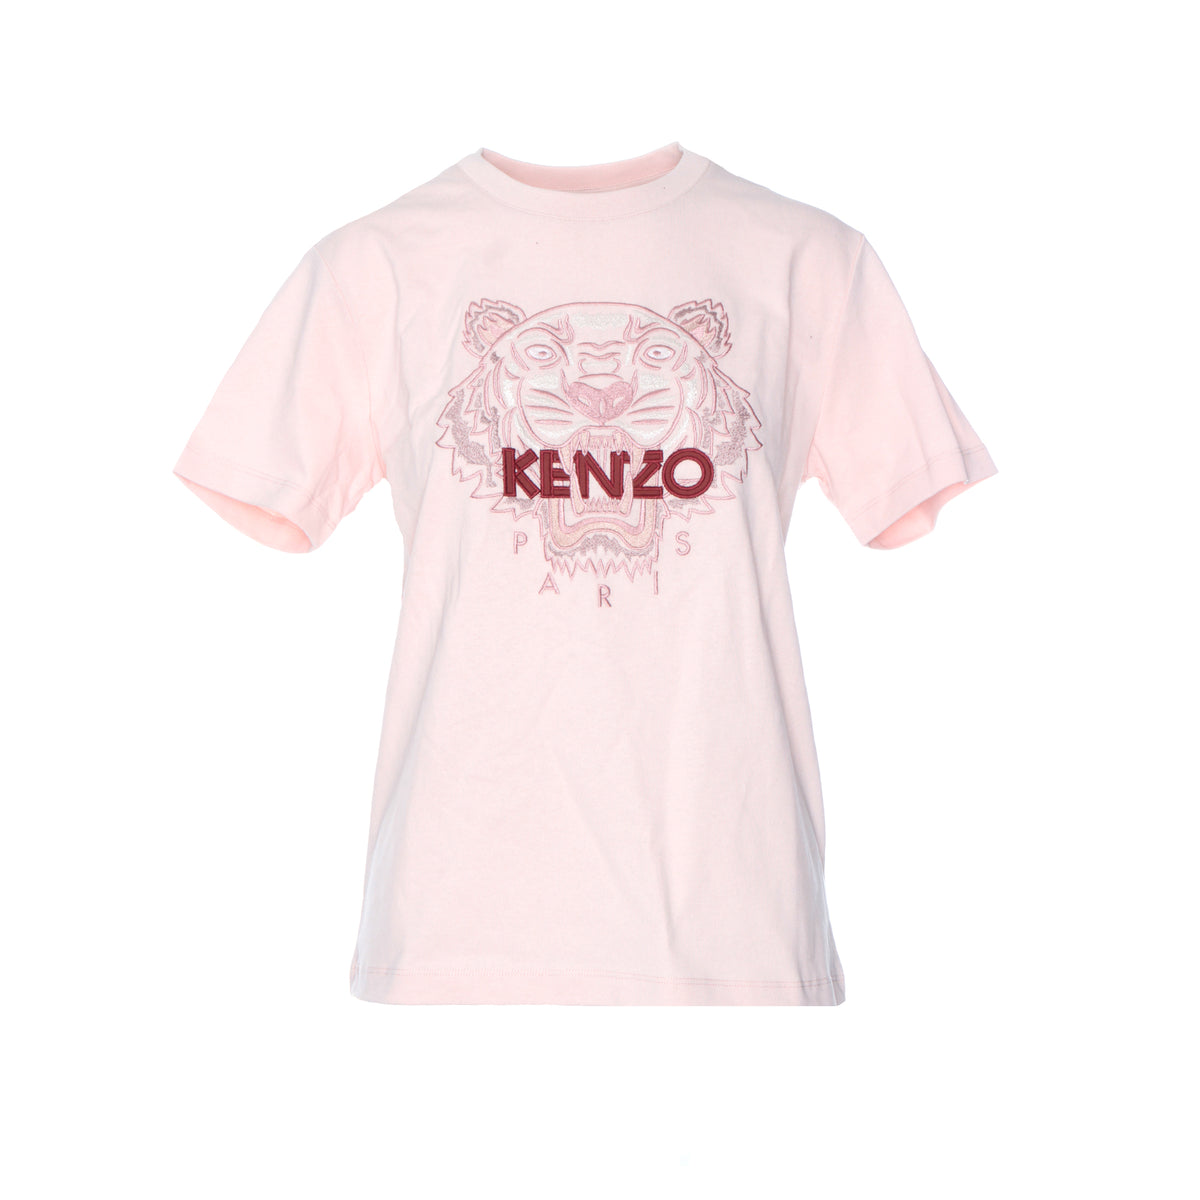 Kenzo FW20 Loose Classic Tiger T-Shirt Faded Pink